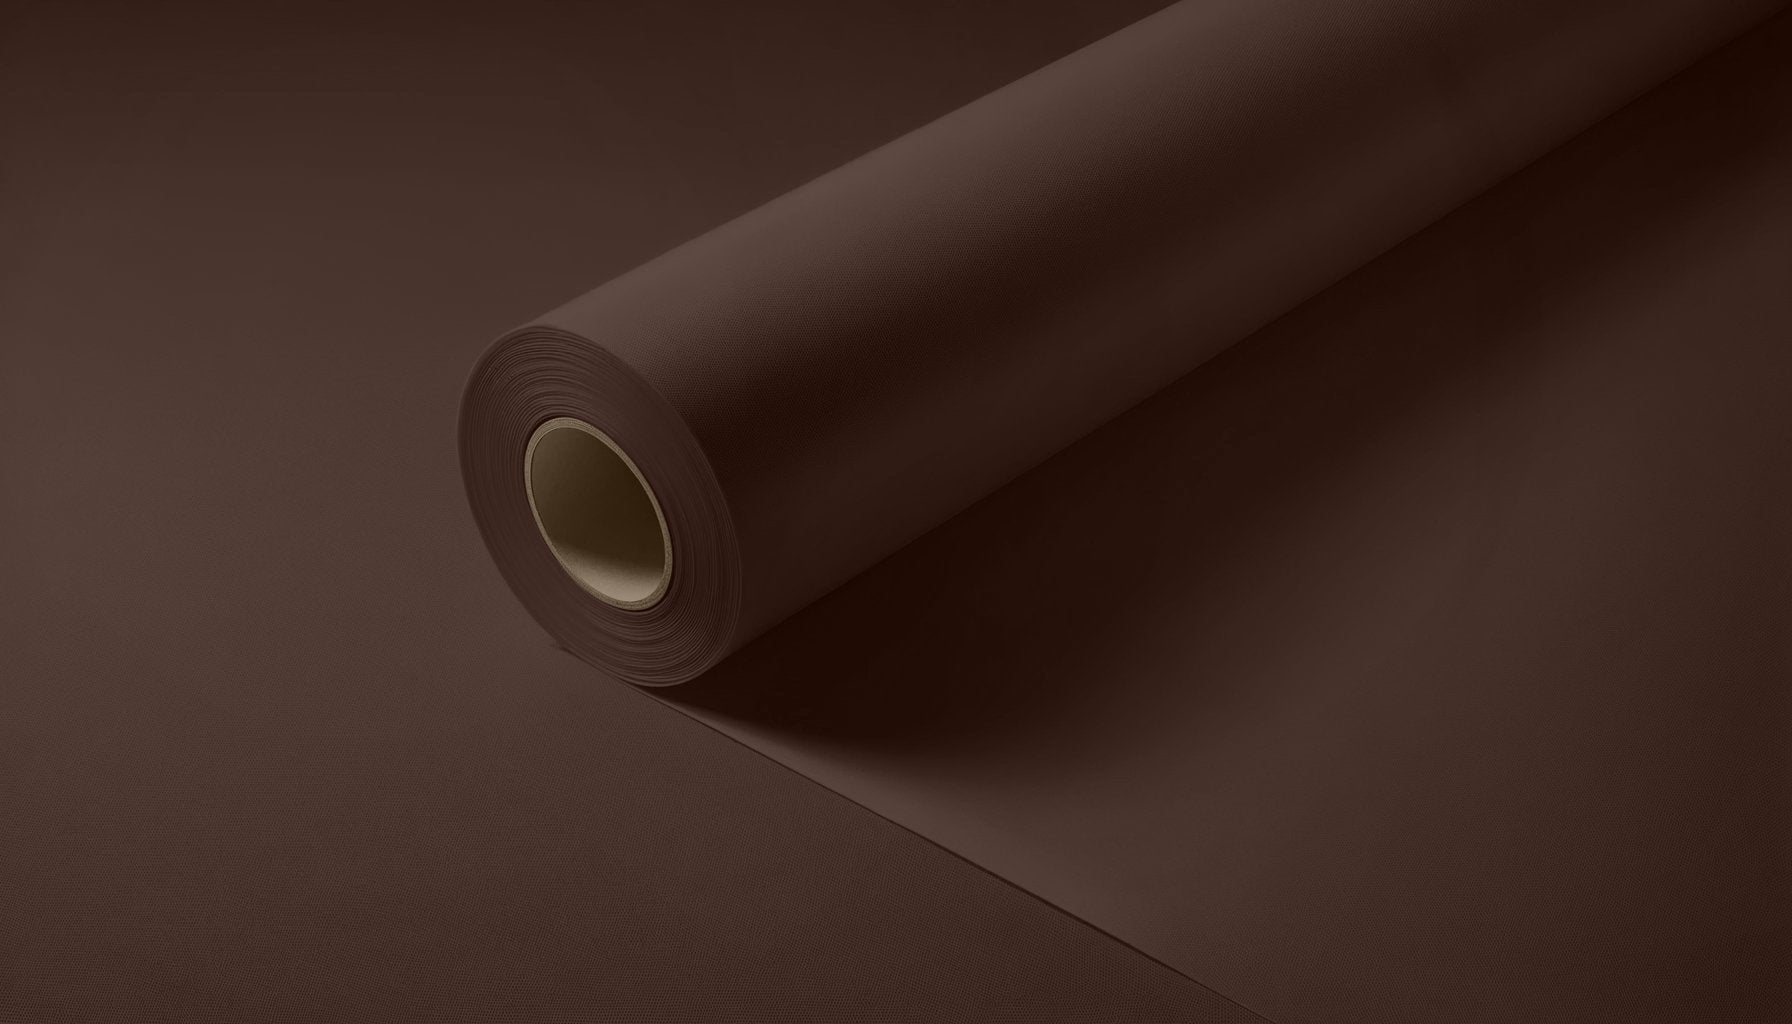 Peel & Stick Removable Re-usable Paint - Color RAL 8017 Chocolate Brown - offRAL™ - RALRAW LLC, USA